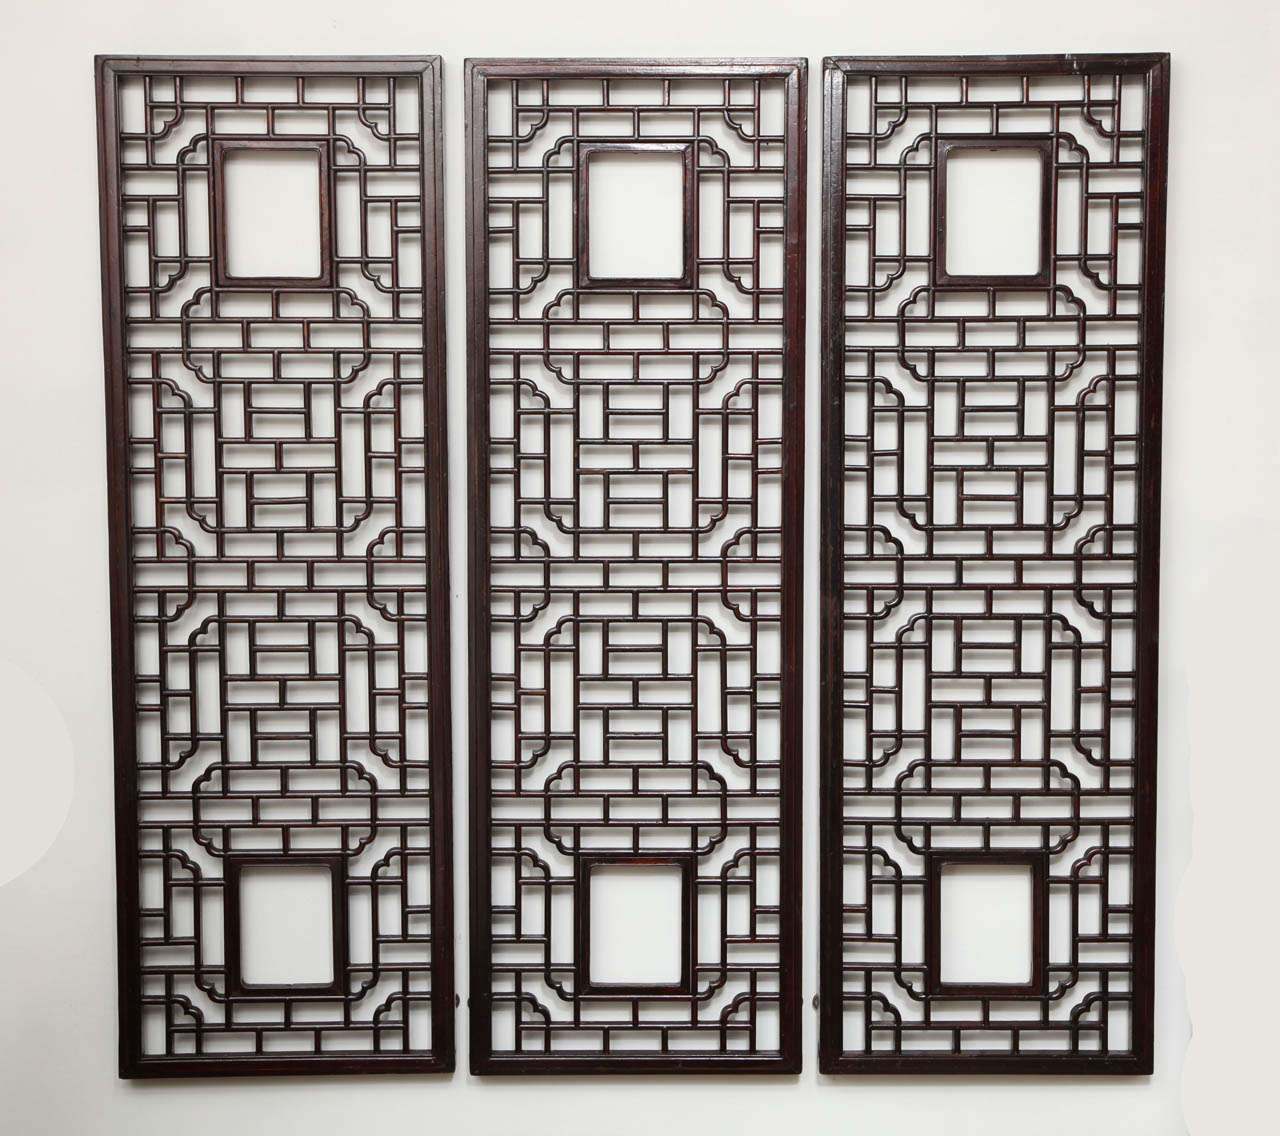 Three long Chinese lattice screen panels.  Classic wall decor or divider.  Can be backed with a mirror.  Only one still available.